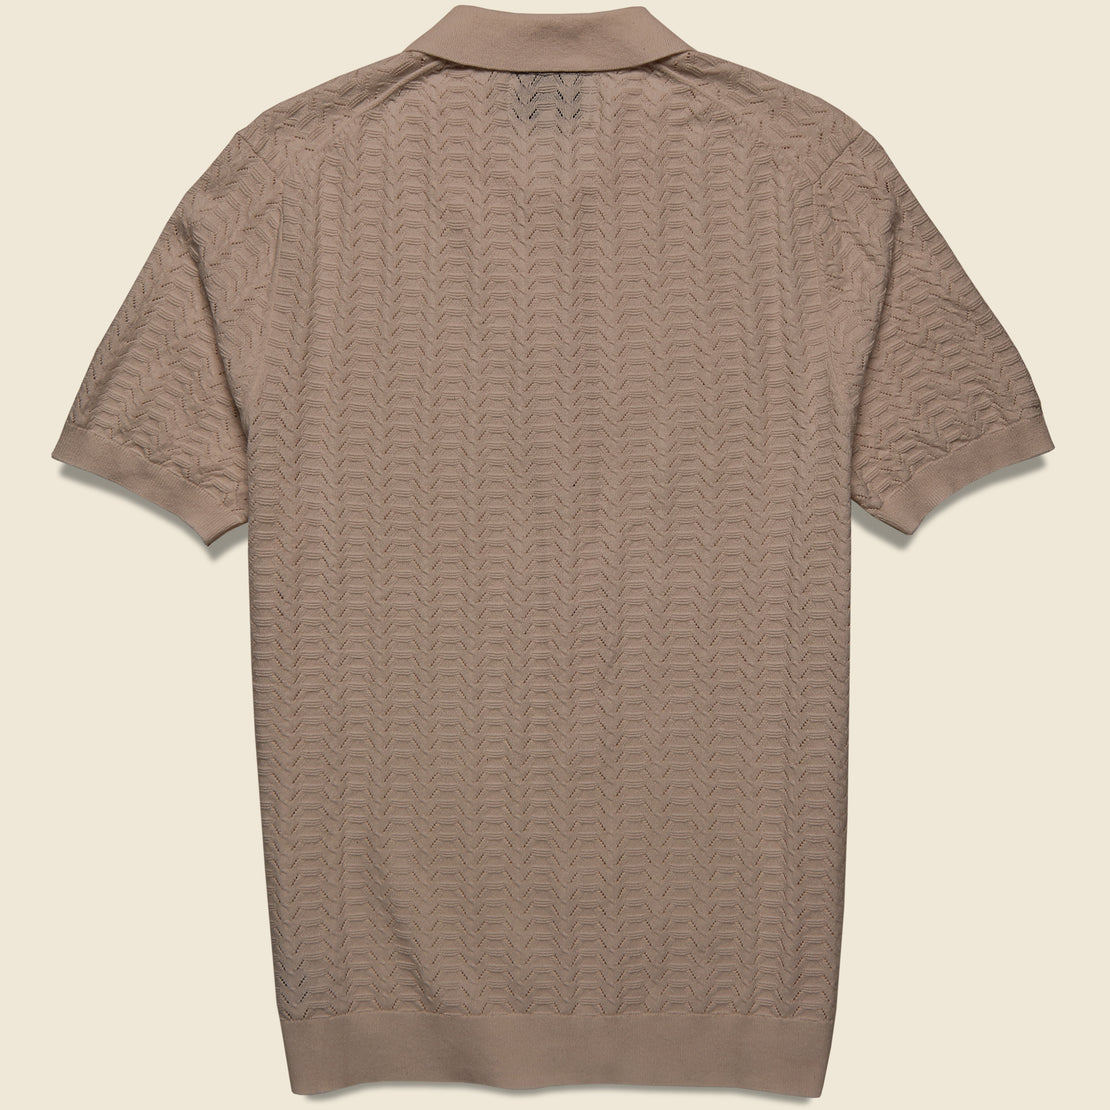 Pointelle Tellaro Shirt - Brown - Wax London - STAG Provisions - Tops - S/S Knit